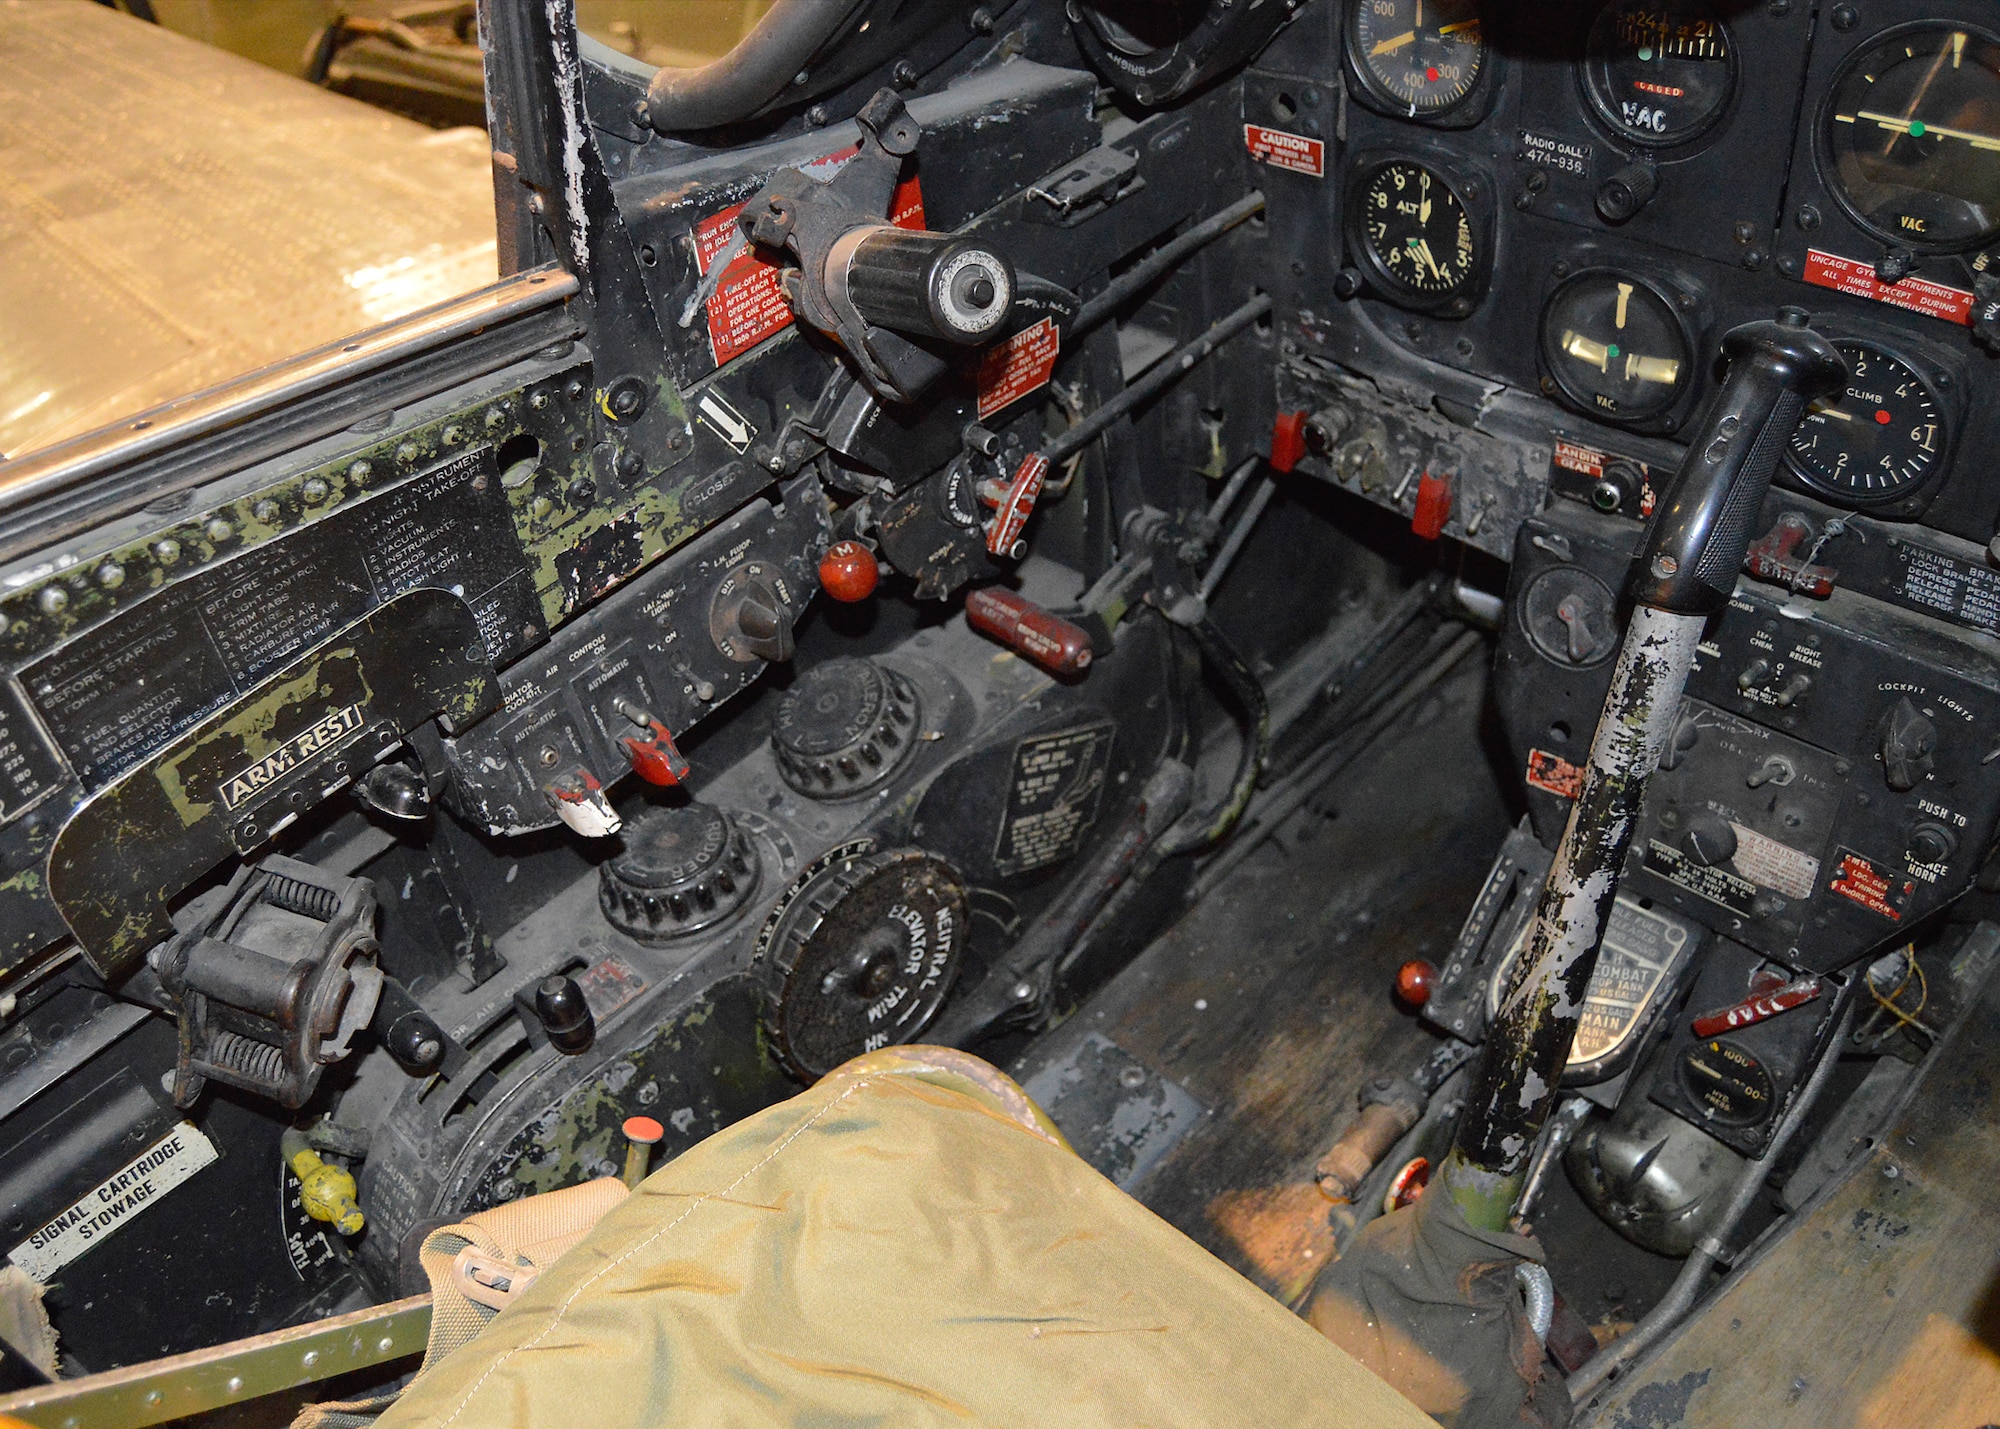 DAYTON, Ohio -- North American P-51D cockpit in the WWII Gallery at the National Museum of the United States Air Force. (U.S. Air Force photo)